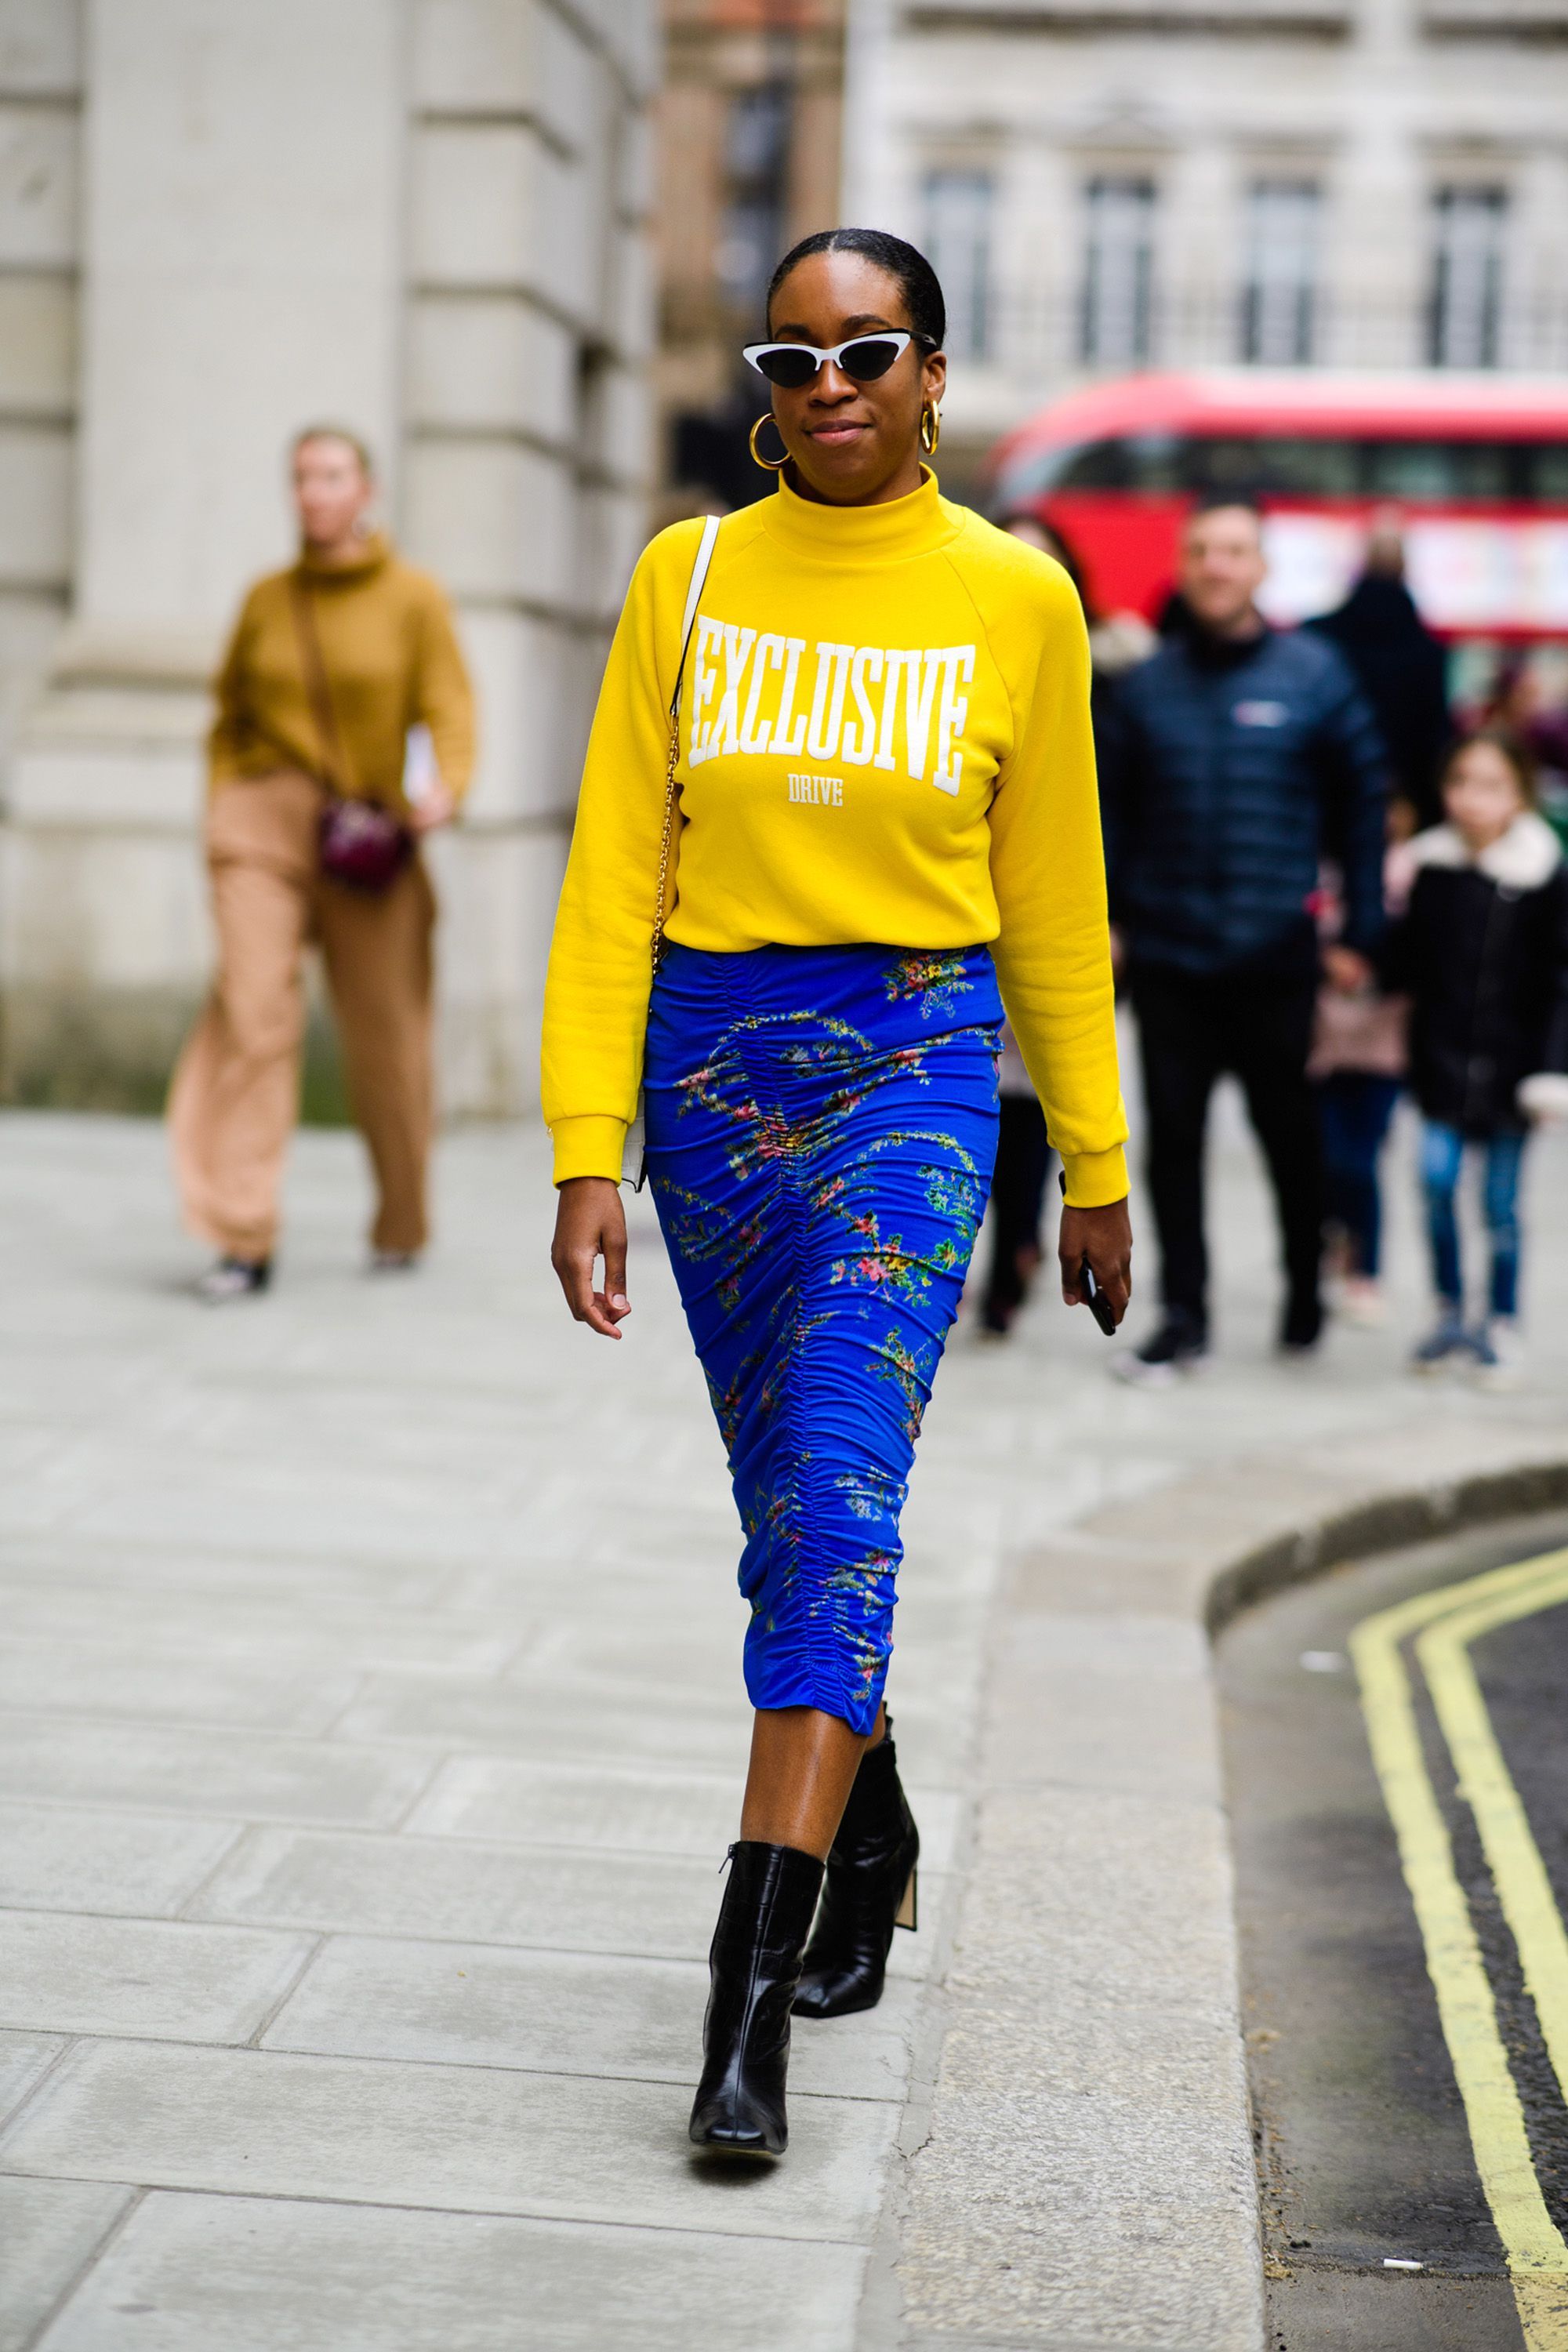 Street Style from London: Fashion Week Edition | Best LifeStyle Buzz